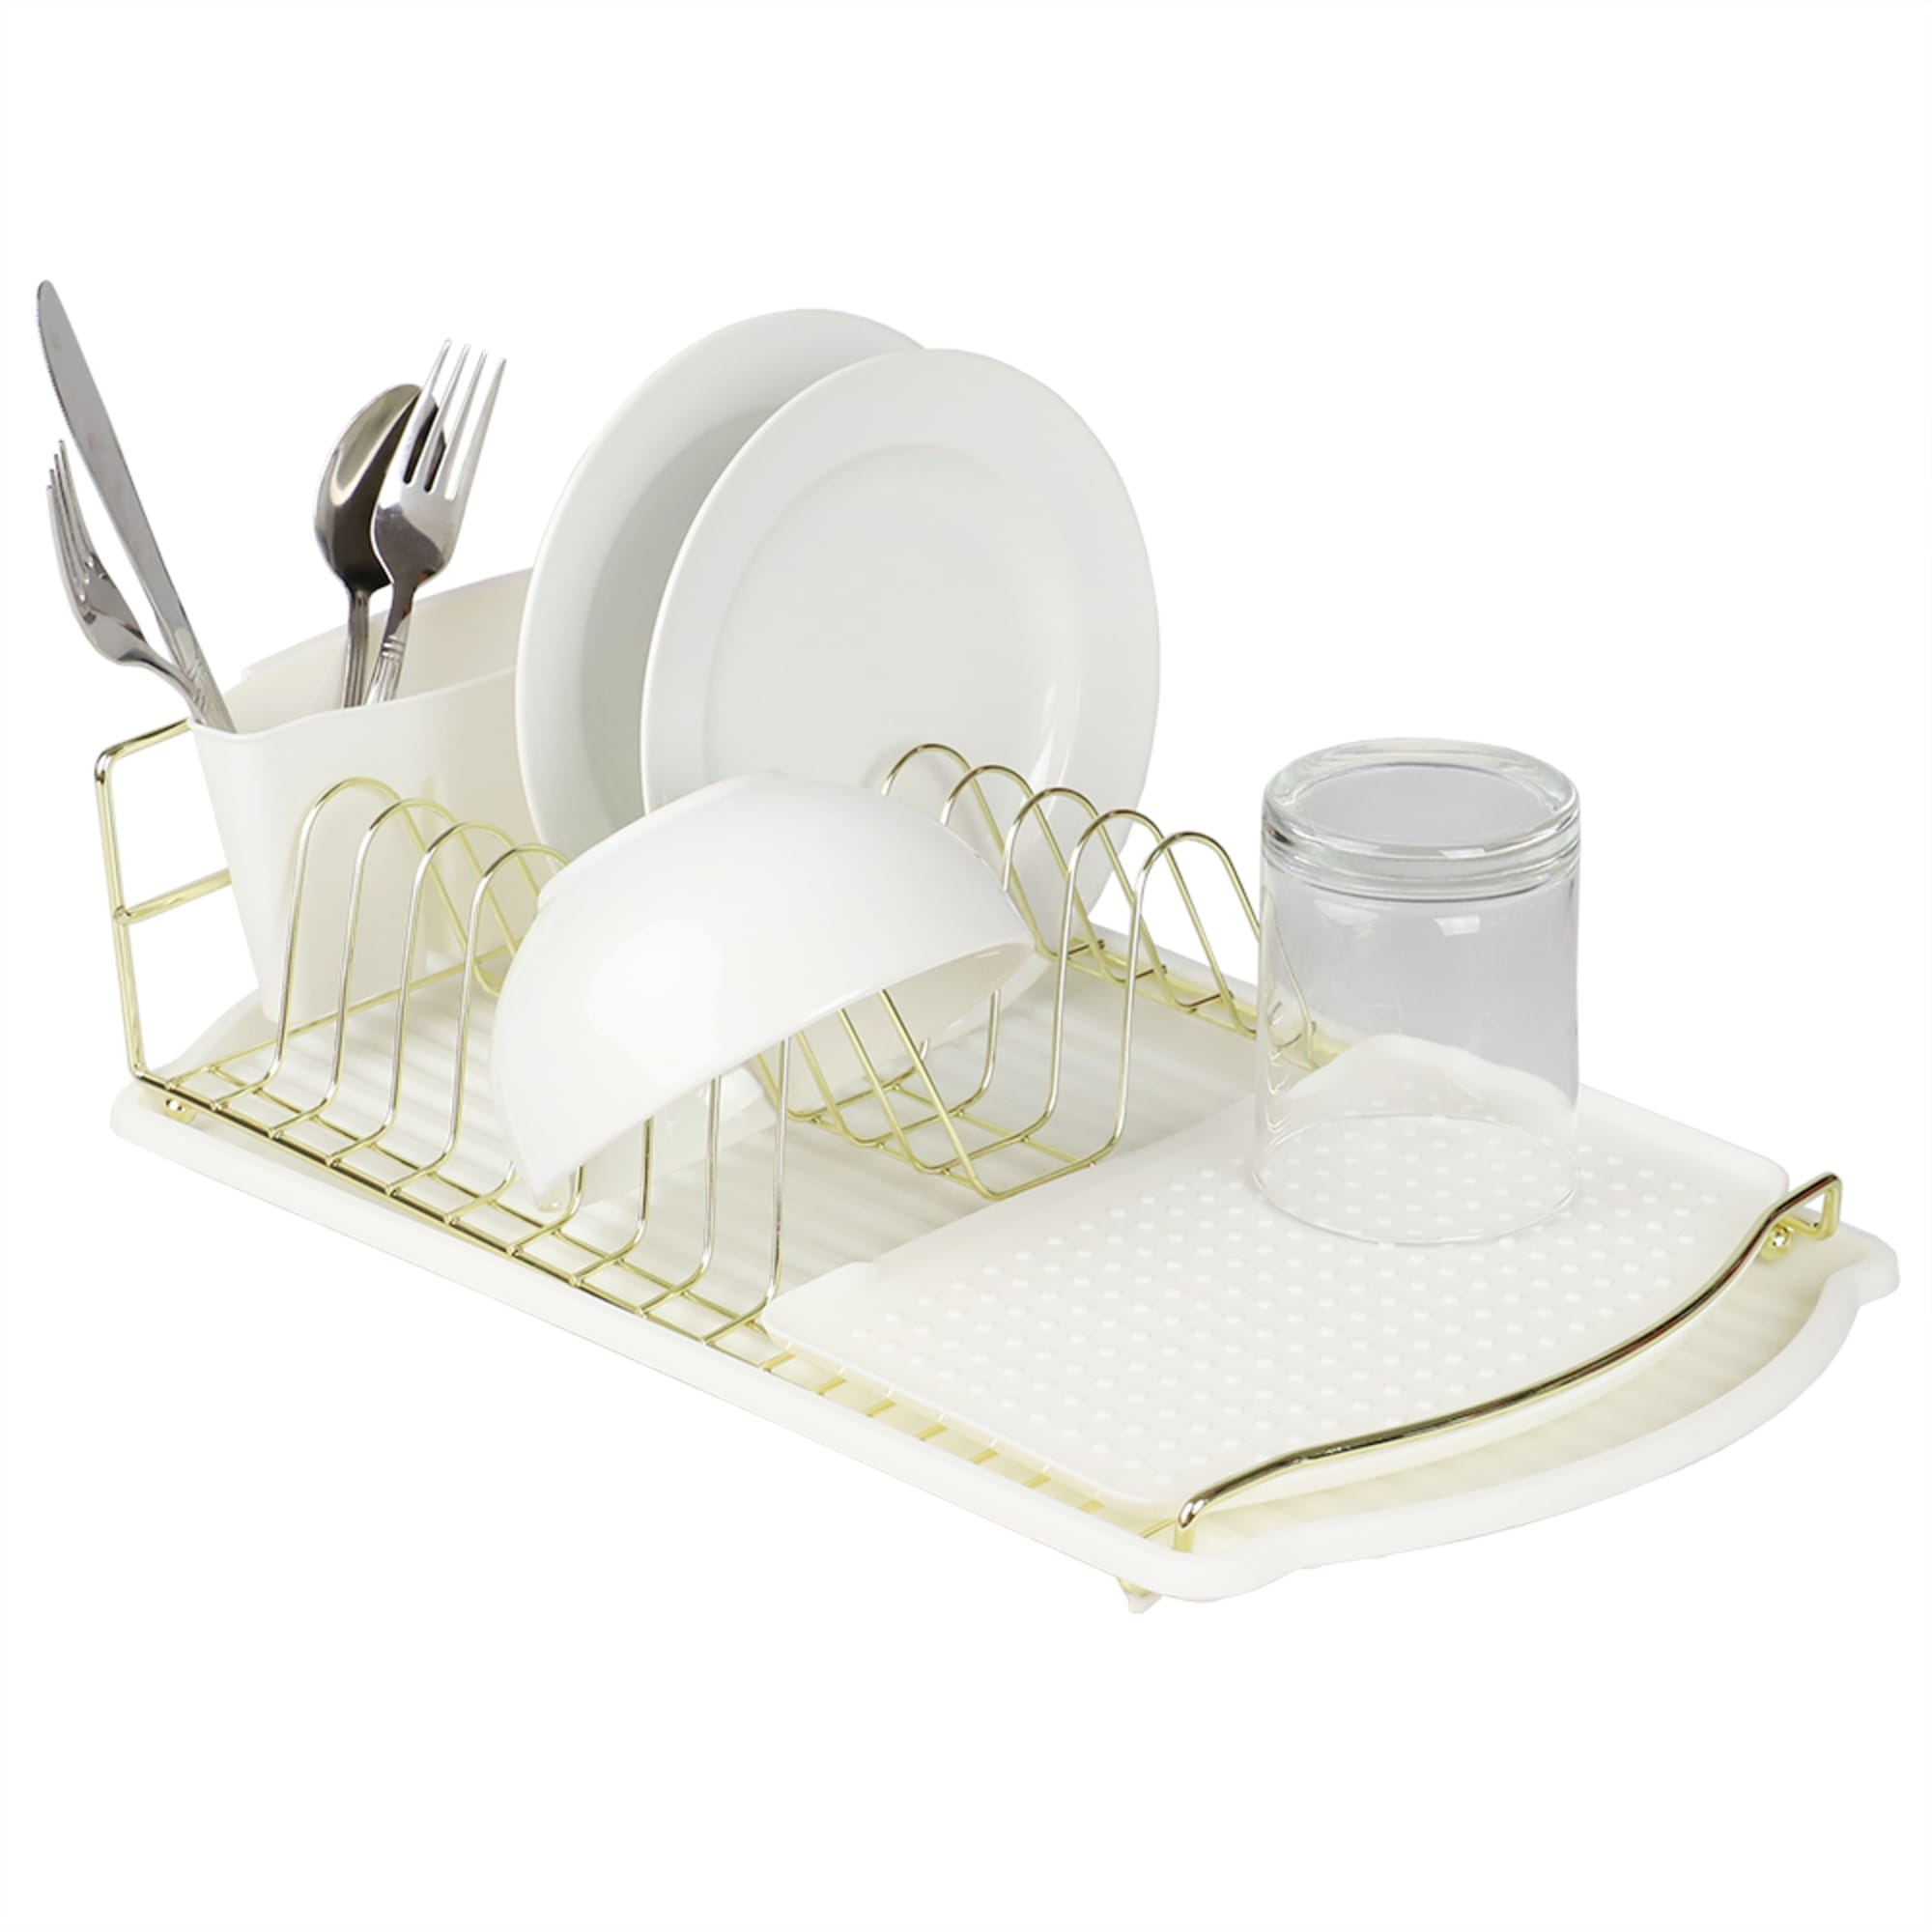 Michael Graves Design Deluxe Dish Rack with Gold Finish and Removable  Utensil Holder, White/Gold, KITCHEN ORGANIZATION